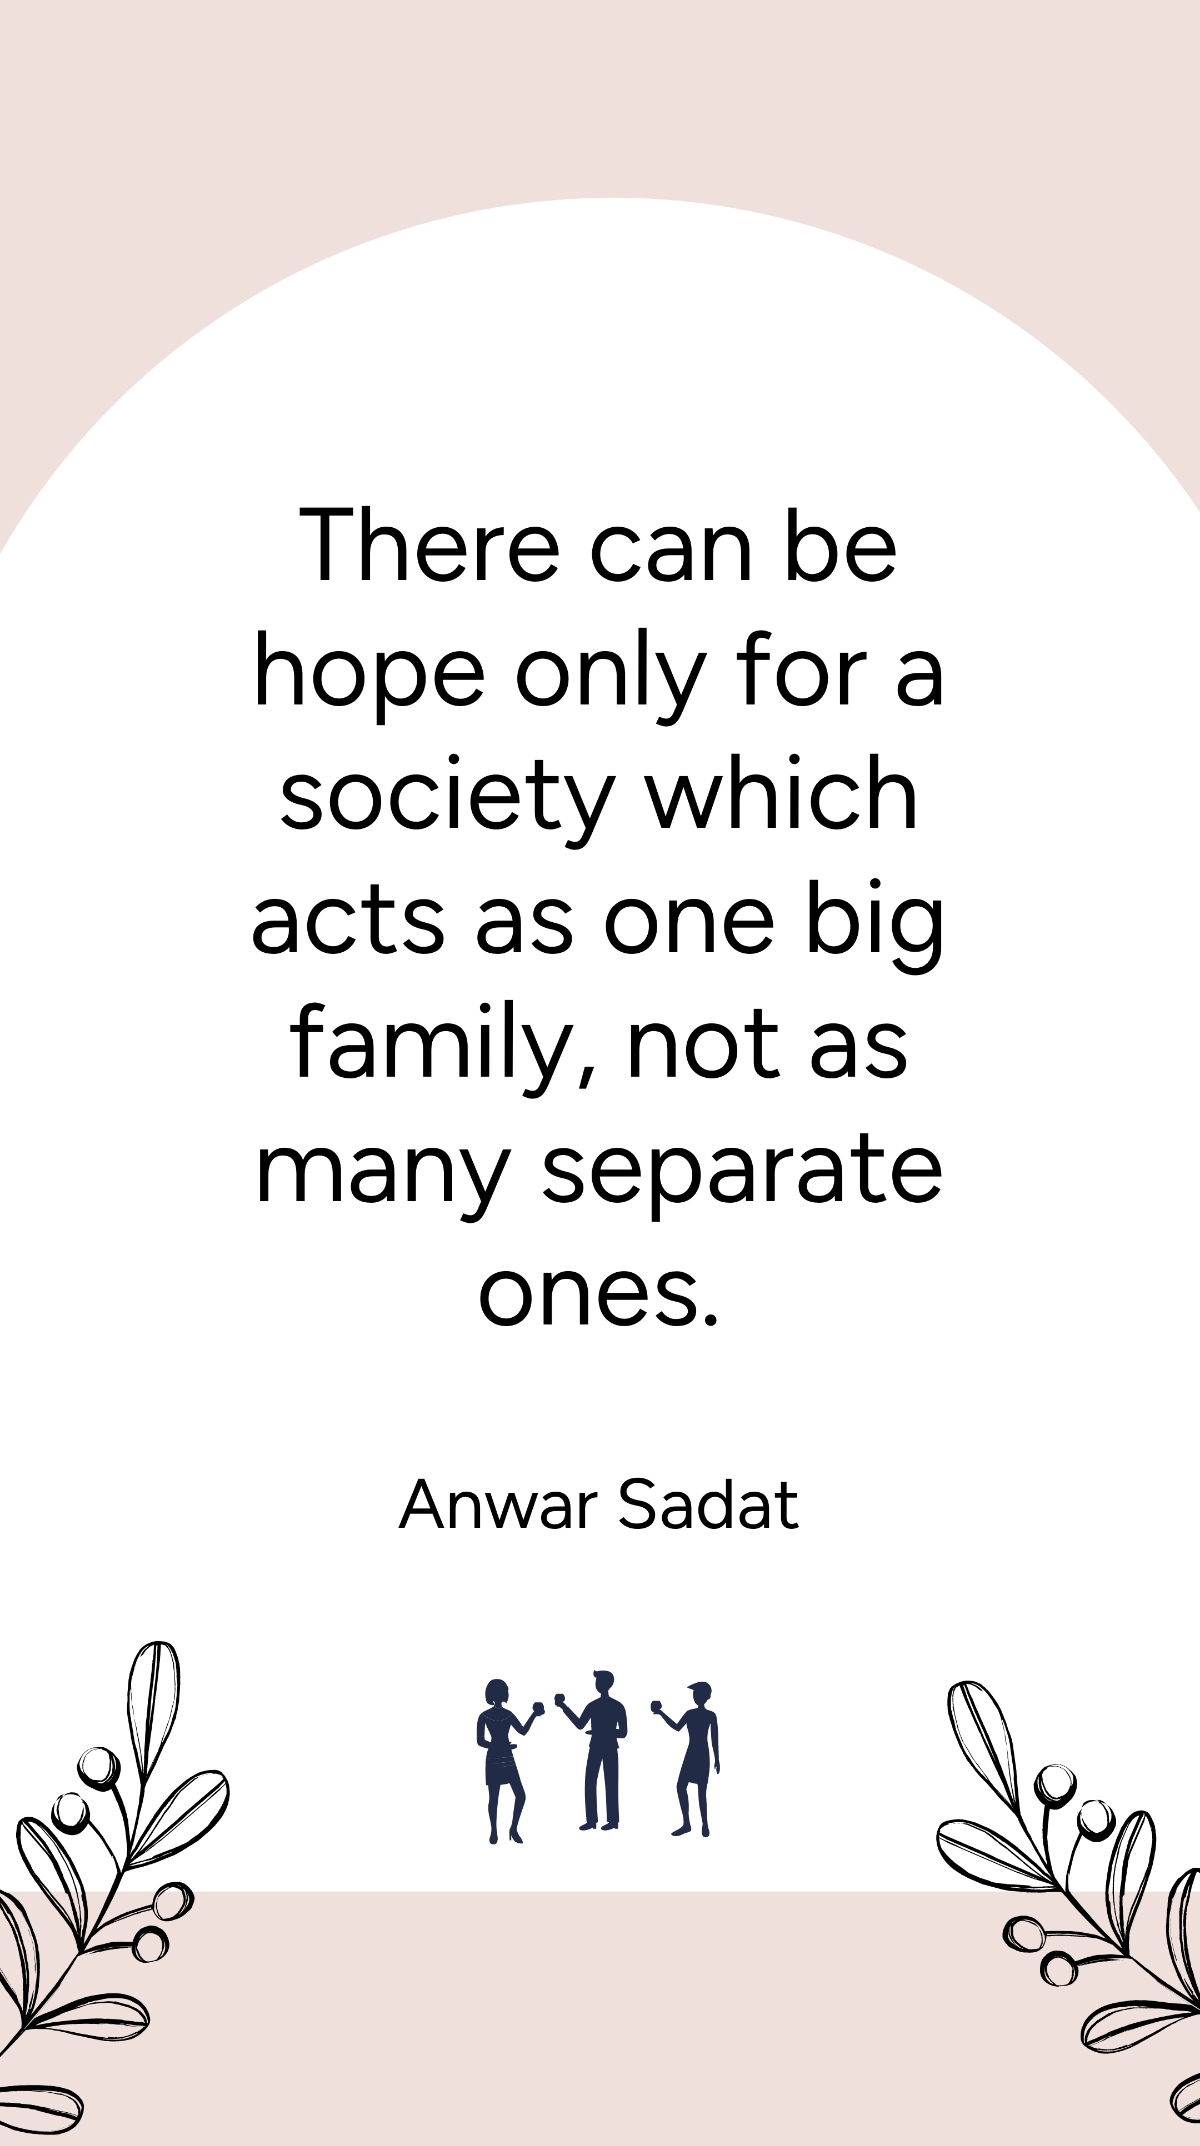 Anwar Sadat - There can be hope only for a society which acts as one big family, not as many separate ones. Template